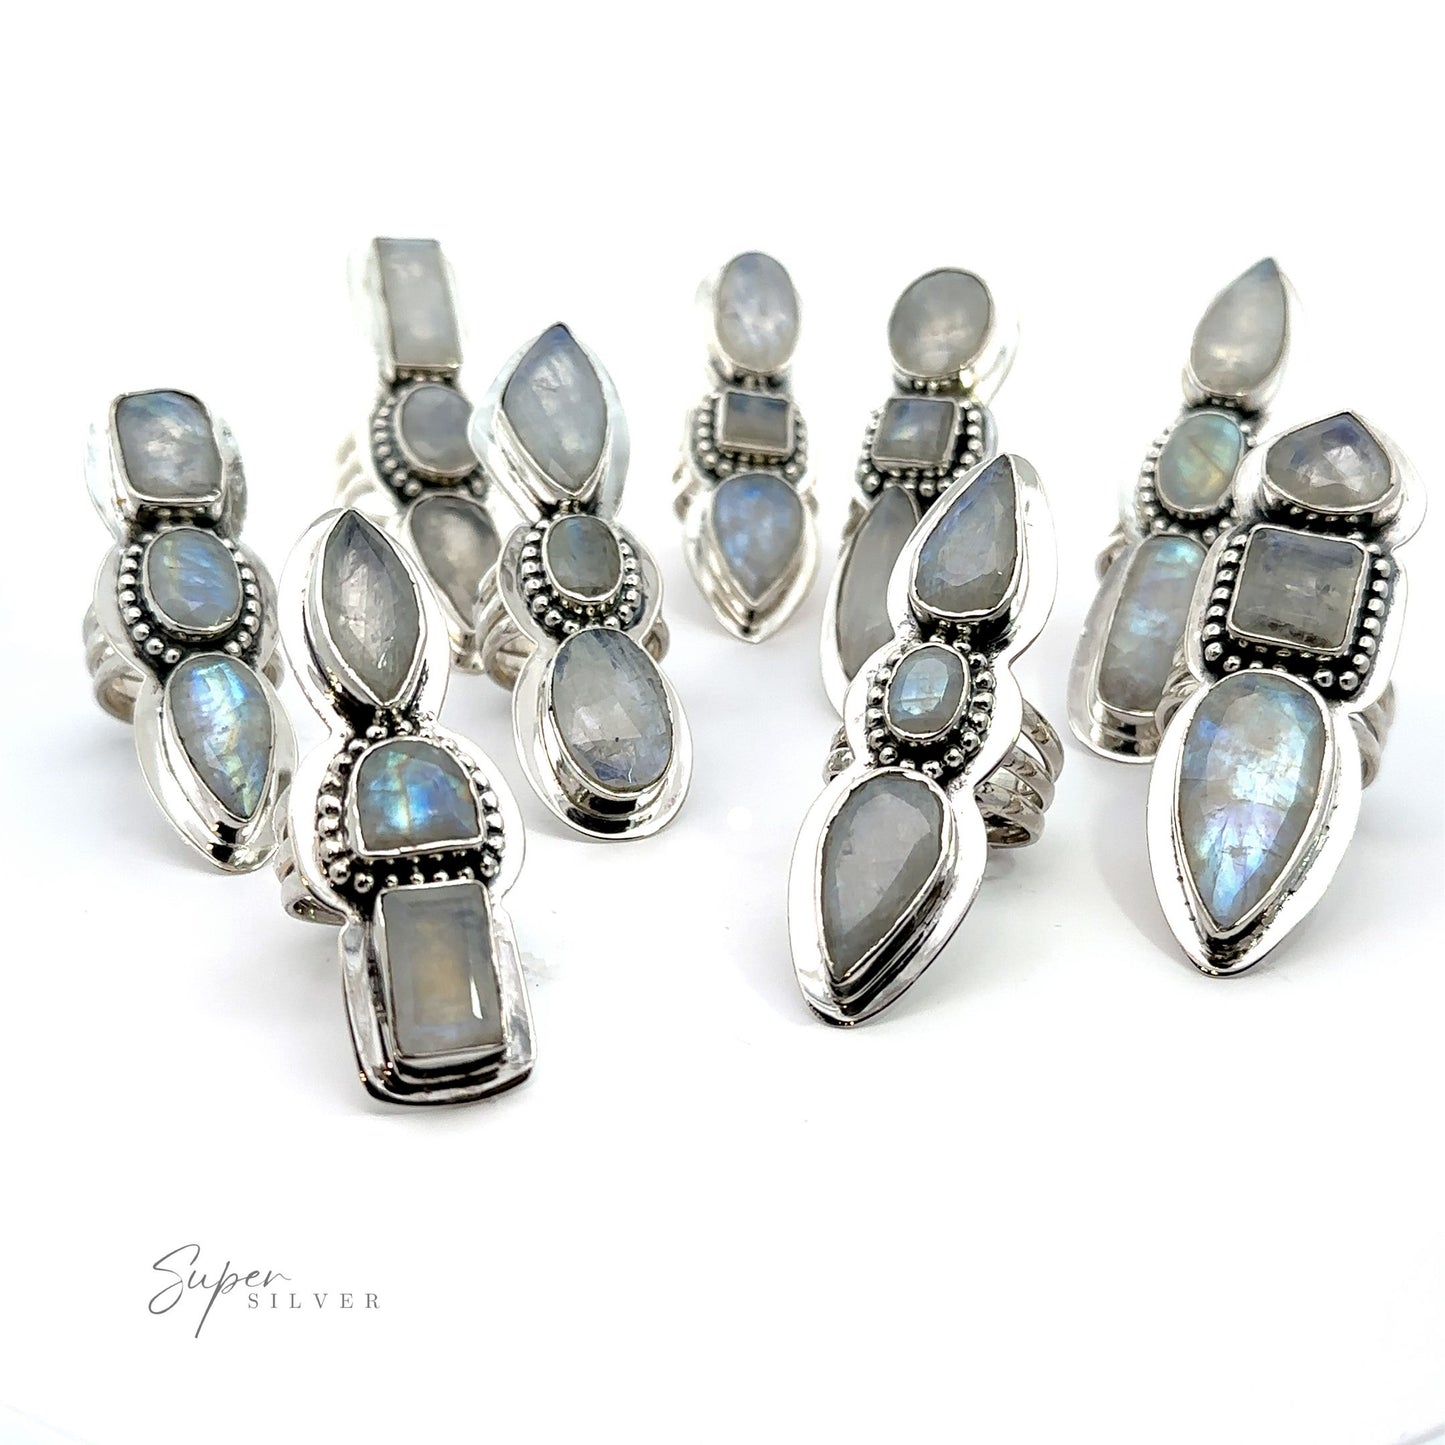 A set of sterling silver Statement Faceted Moonstone Rings with a variety of stones including a laptop sleeve.